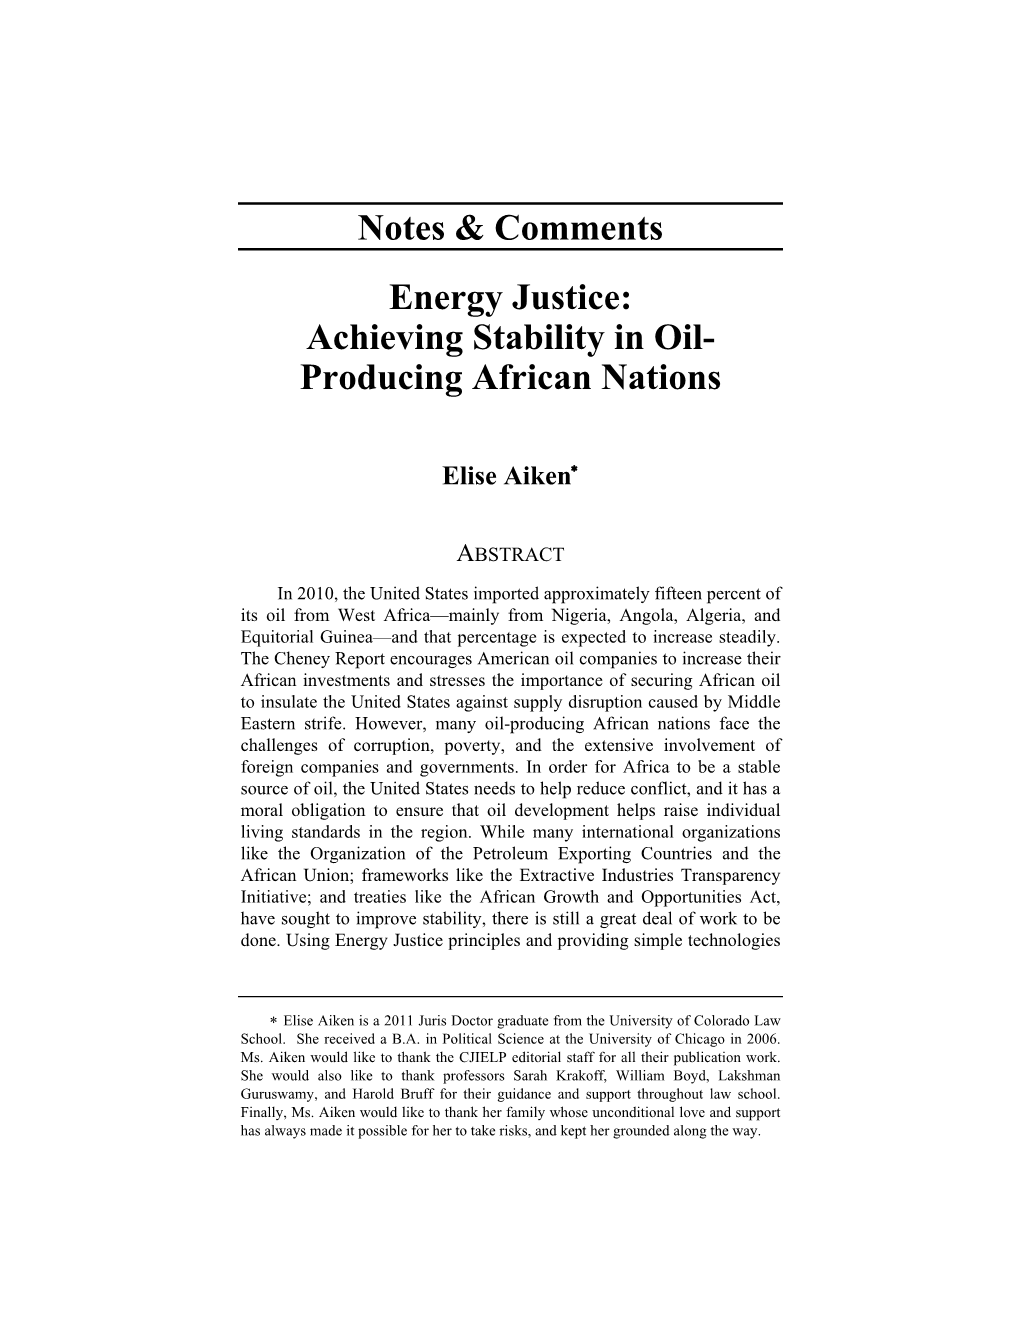 Notes & Comments Energy Justice: Achieving Stability in Oil- Producing